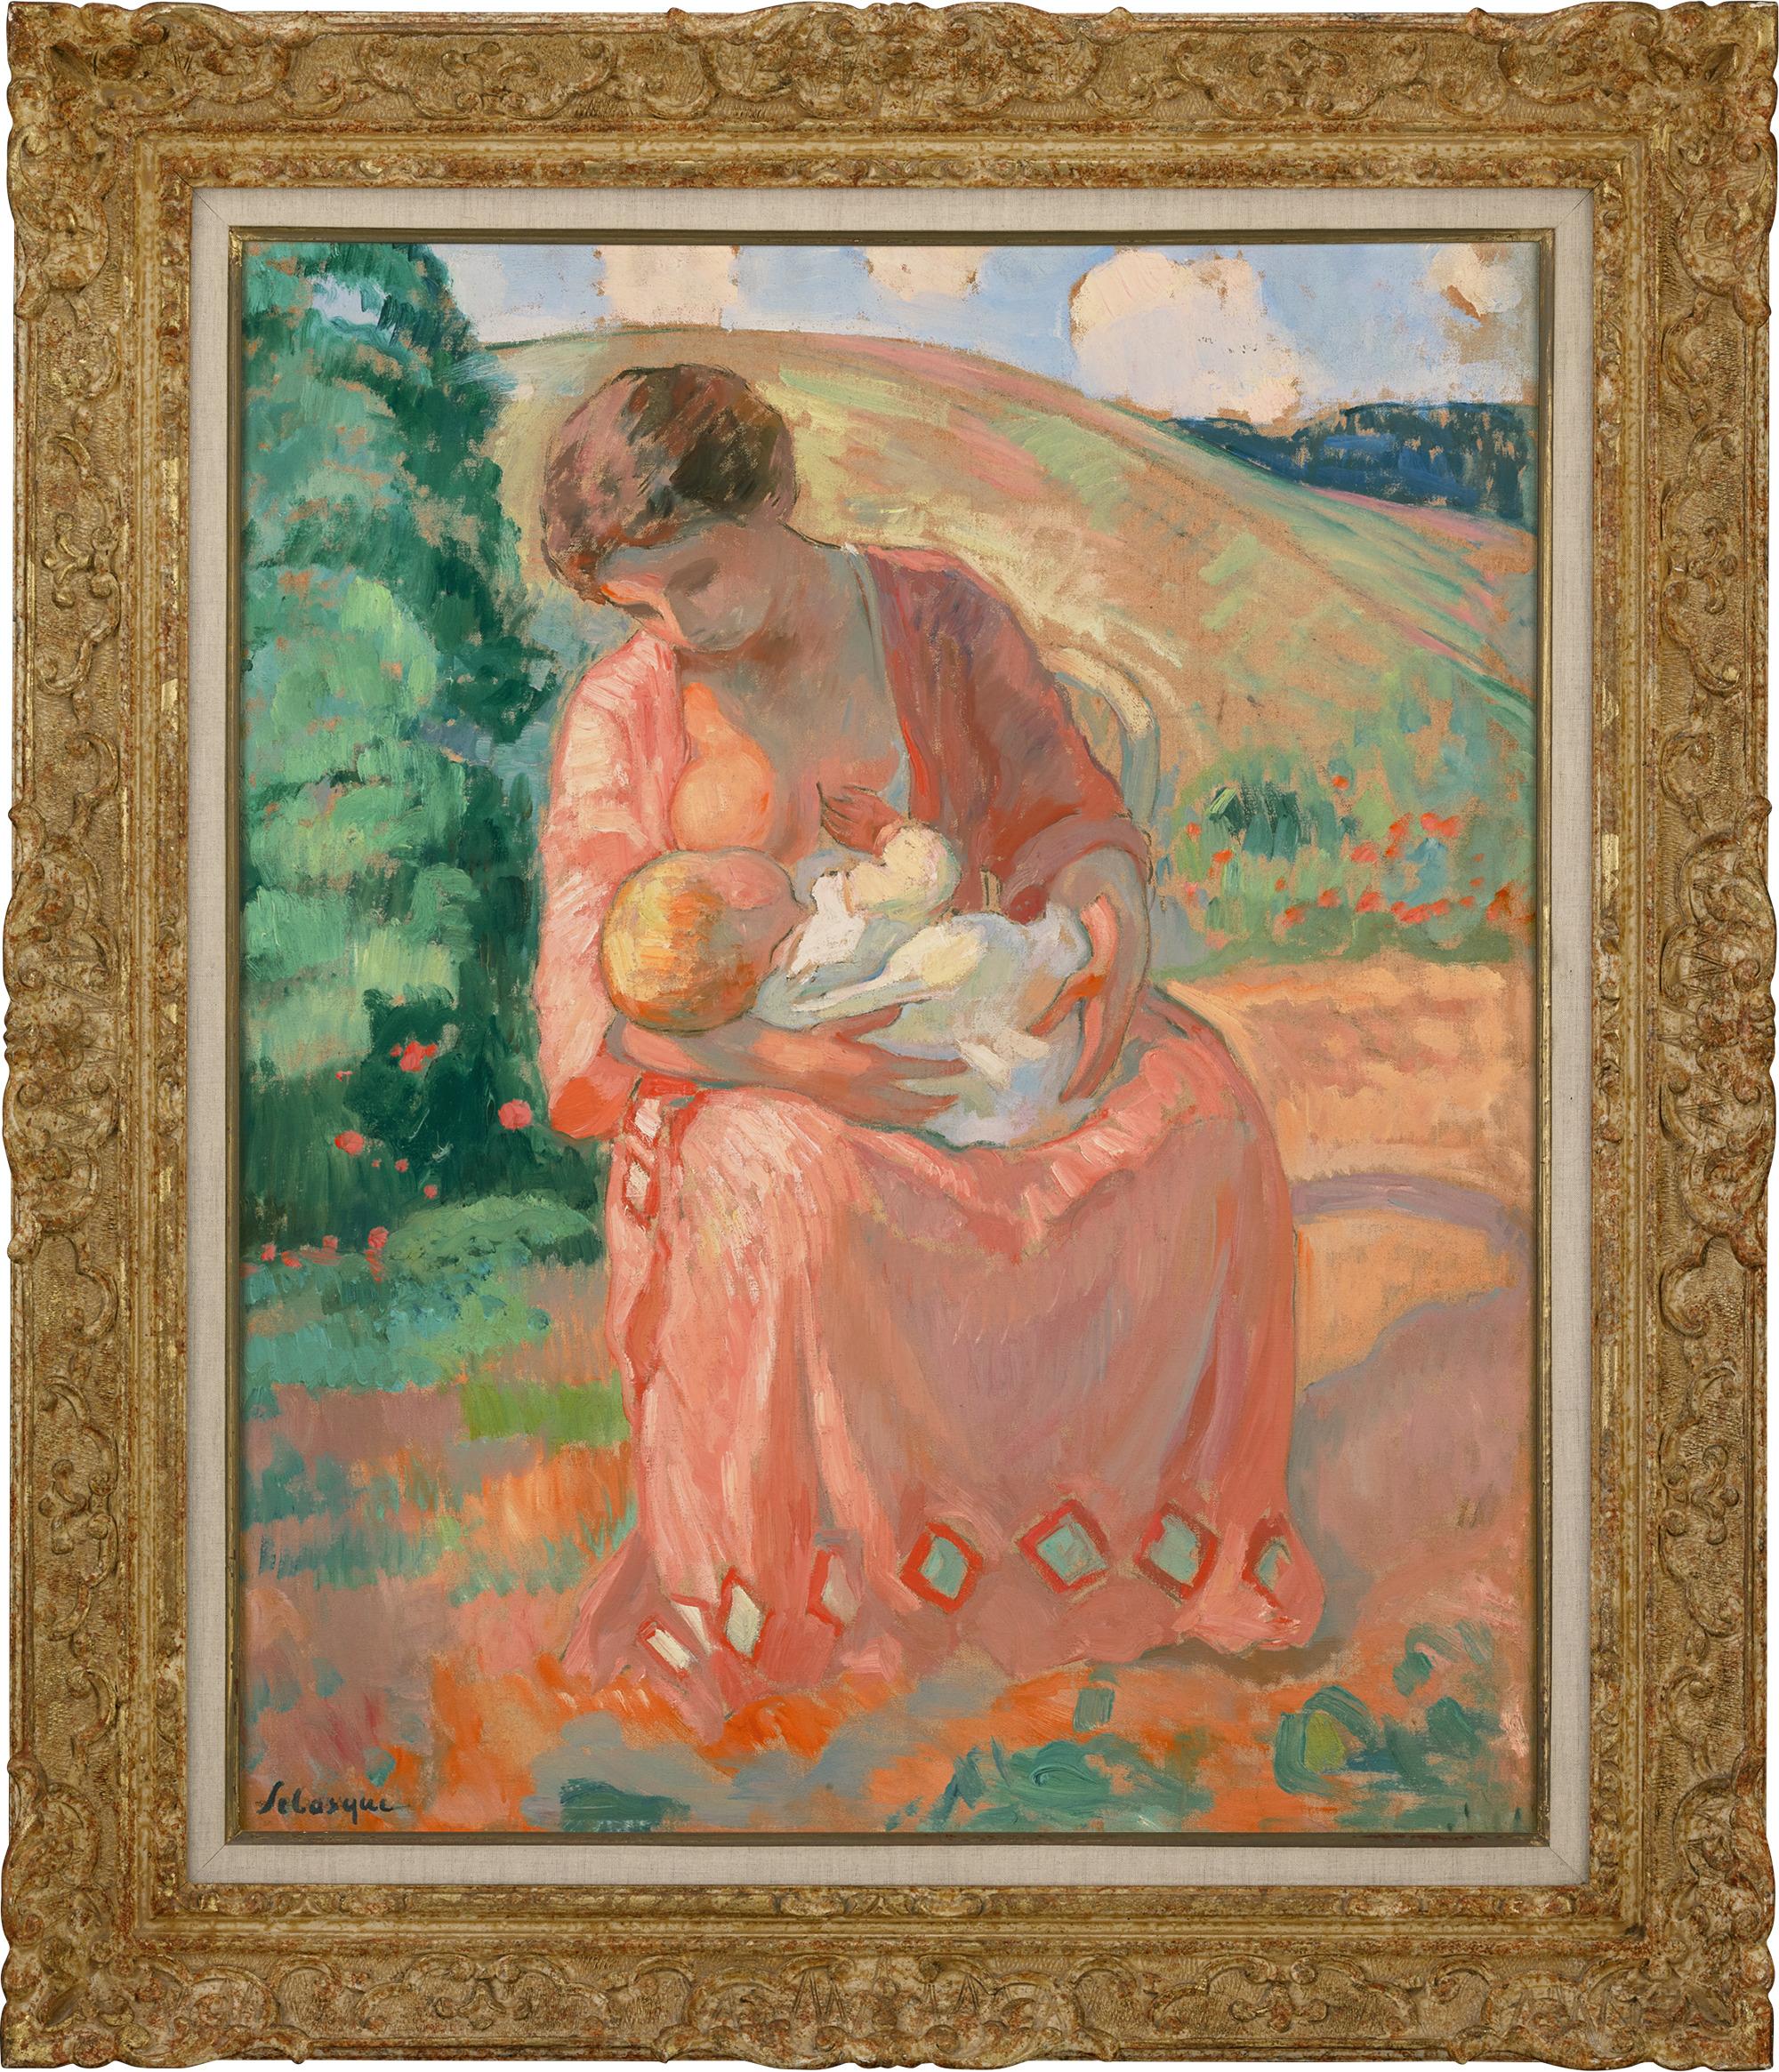 Henri Lebasque
1865-1937  French

Maternité
(Maternity)

Oil on canvas
Signed “Lebasque” (lower left)

In this effusive oil on canvas, Henri Lebasque captures a contemplative scene of a young mother feeding an infant. Referential in subject to